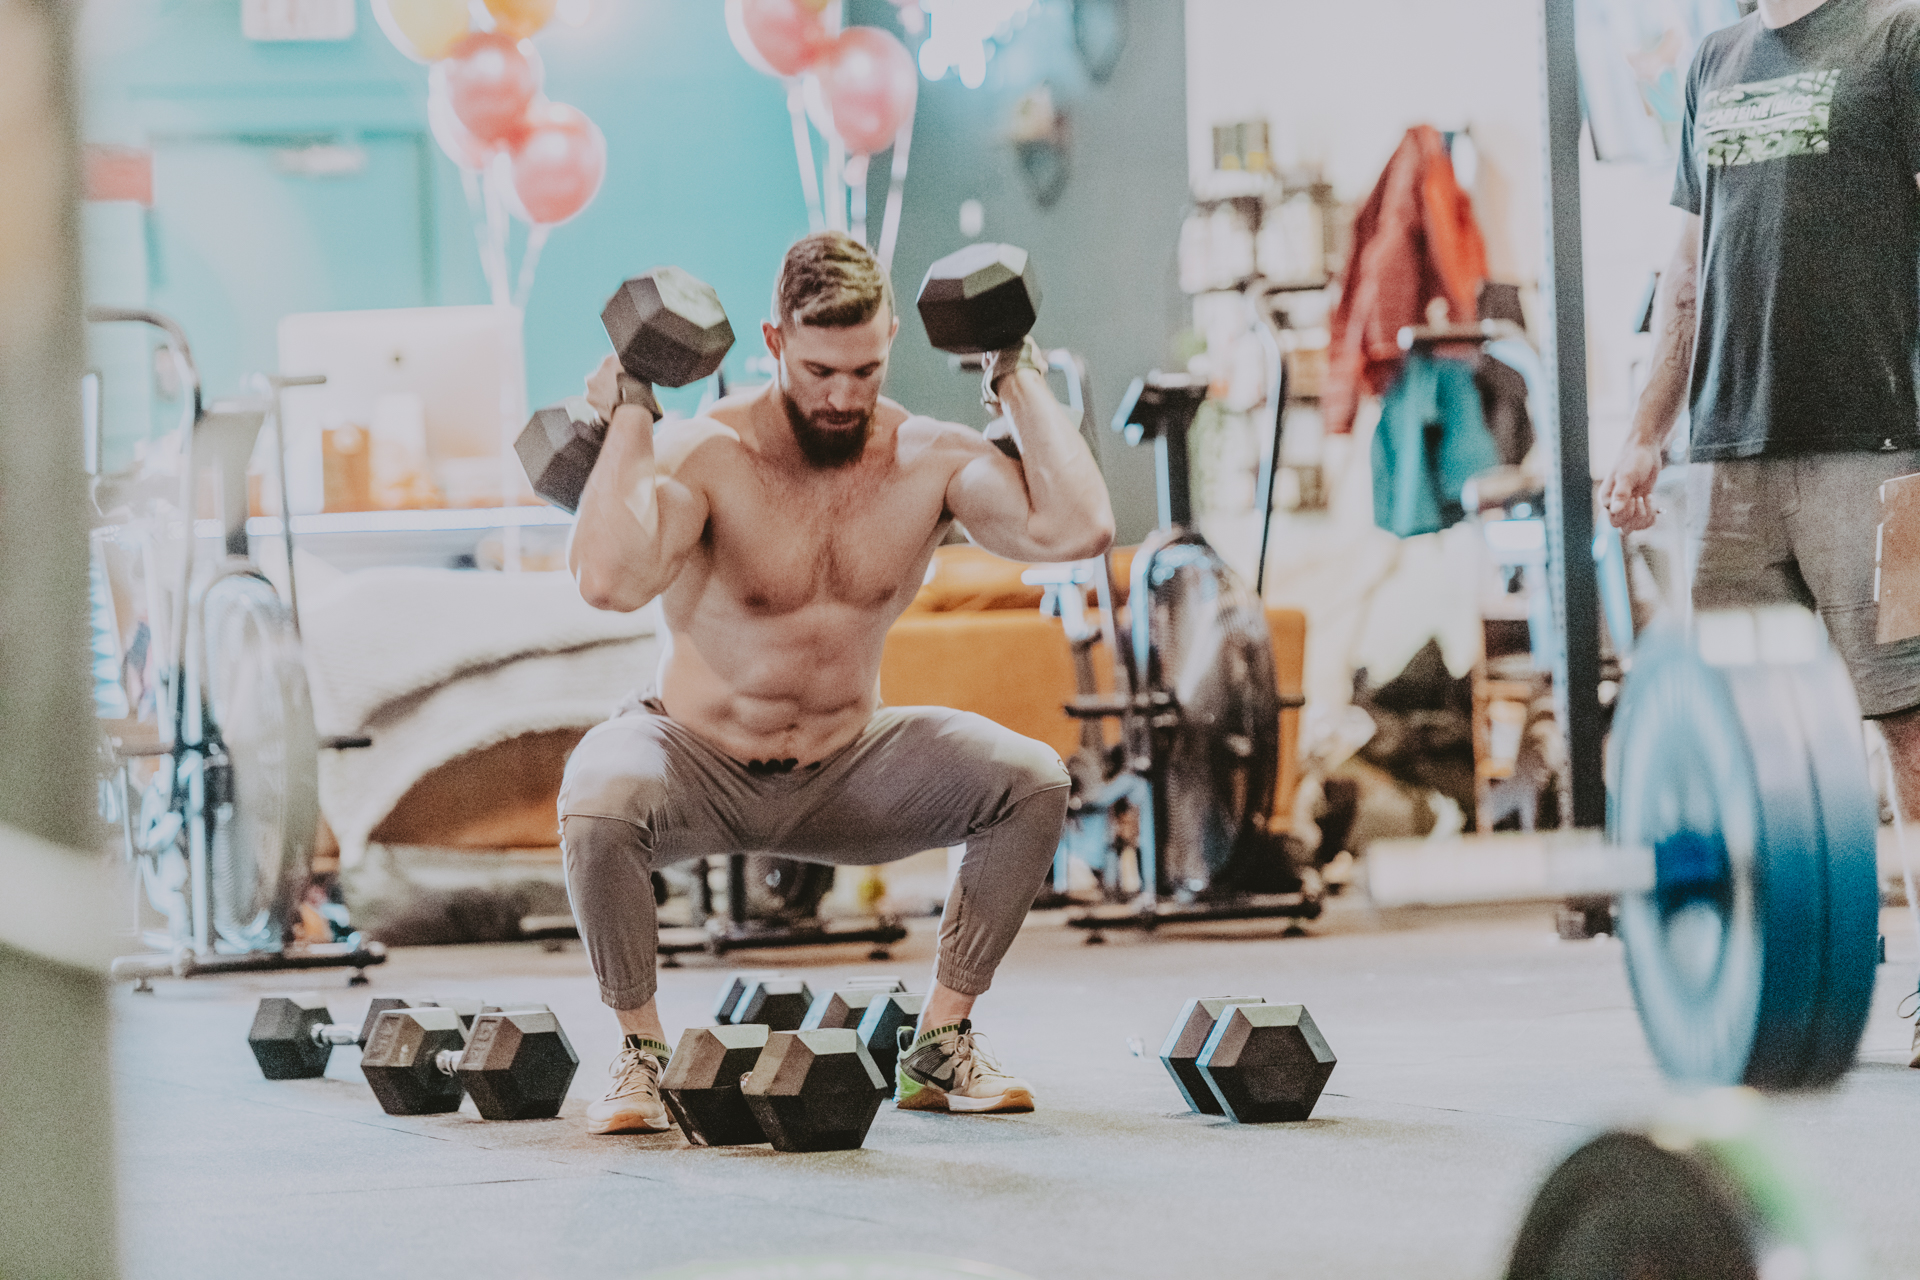 Shirtless man squatting in gym in Victoria BC Crossfit Gym 